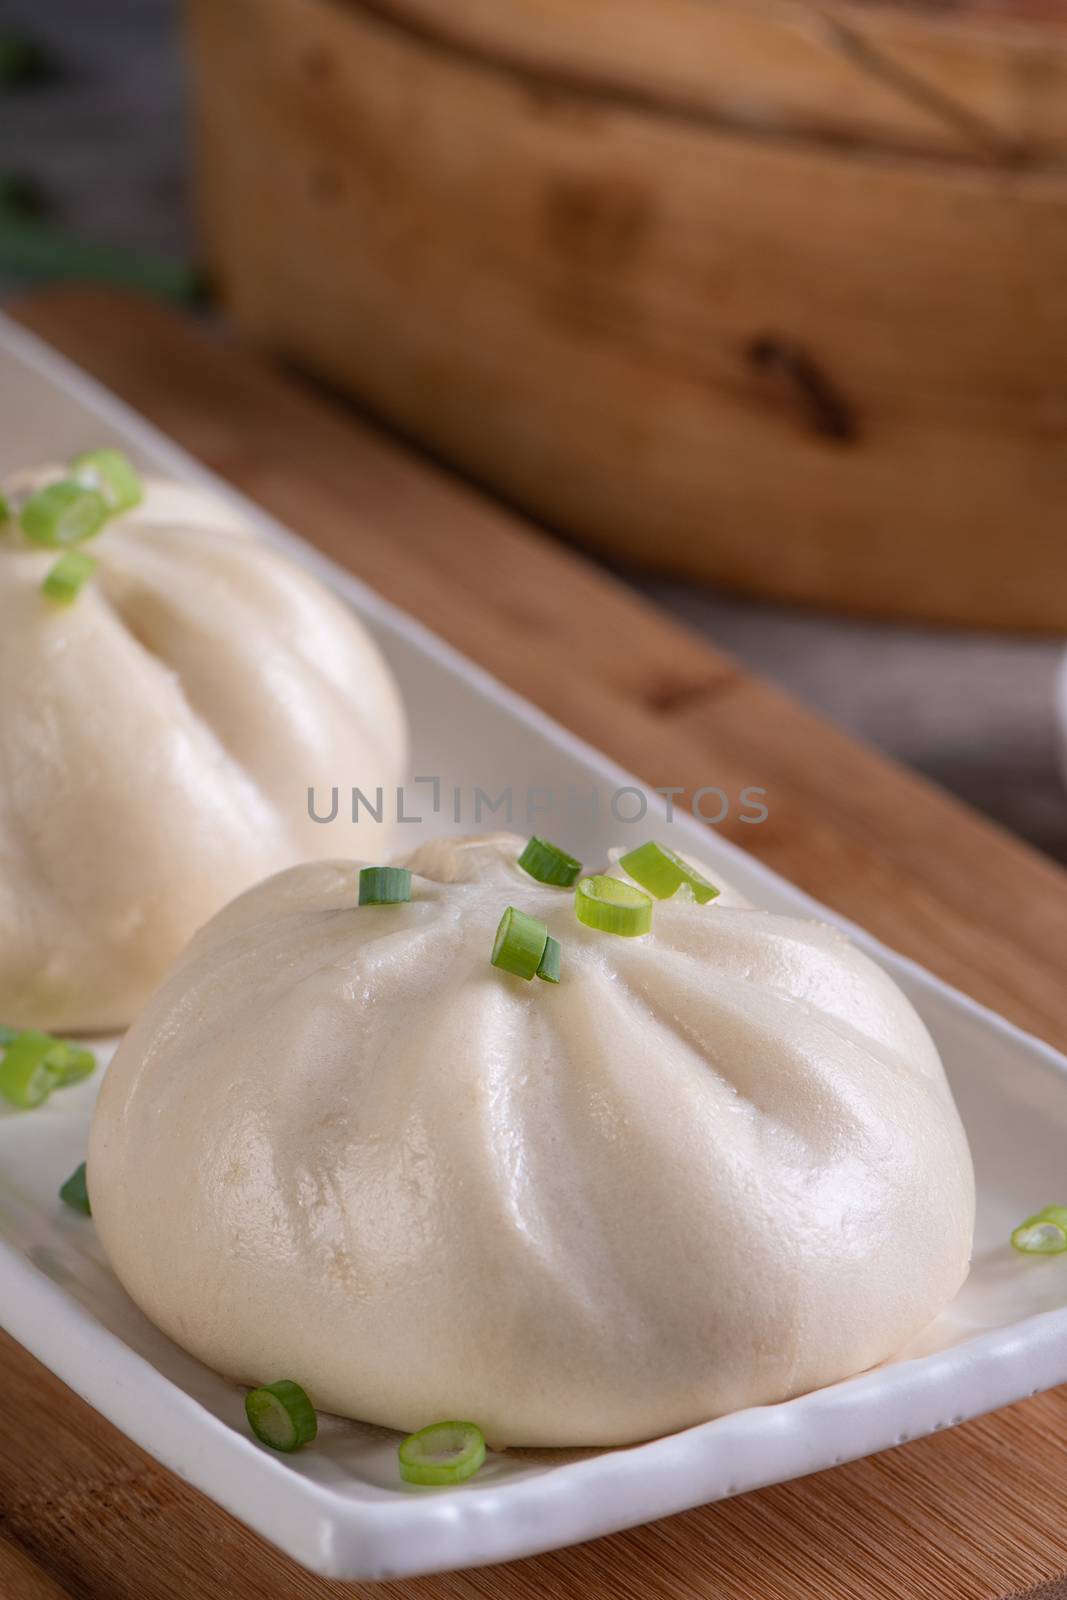 Delicious baozi, Chinese steamed meat bun is ready to eat on ser by ROMIXIMAGE